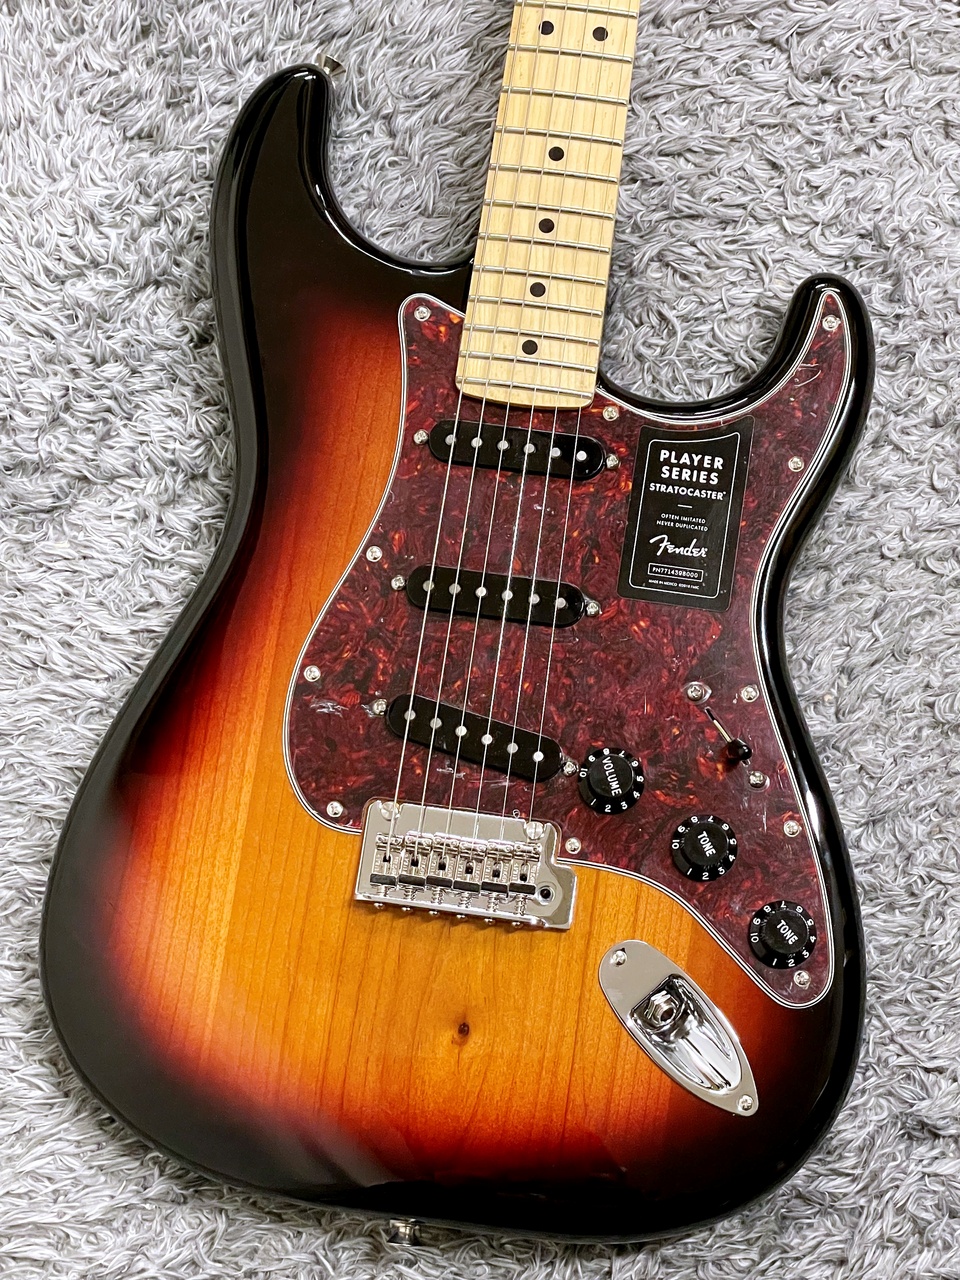 Edition　Limited　3-Colo　フェンダーPlayer　FENDER　ギター　Shell　Stratocaster　Tortoise　Pickguard,